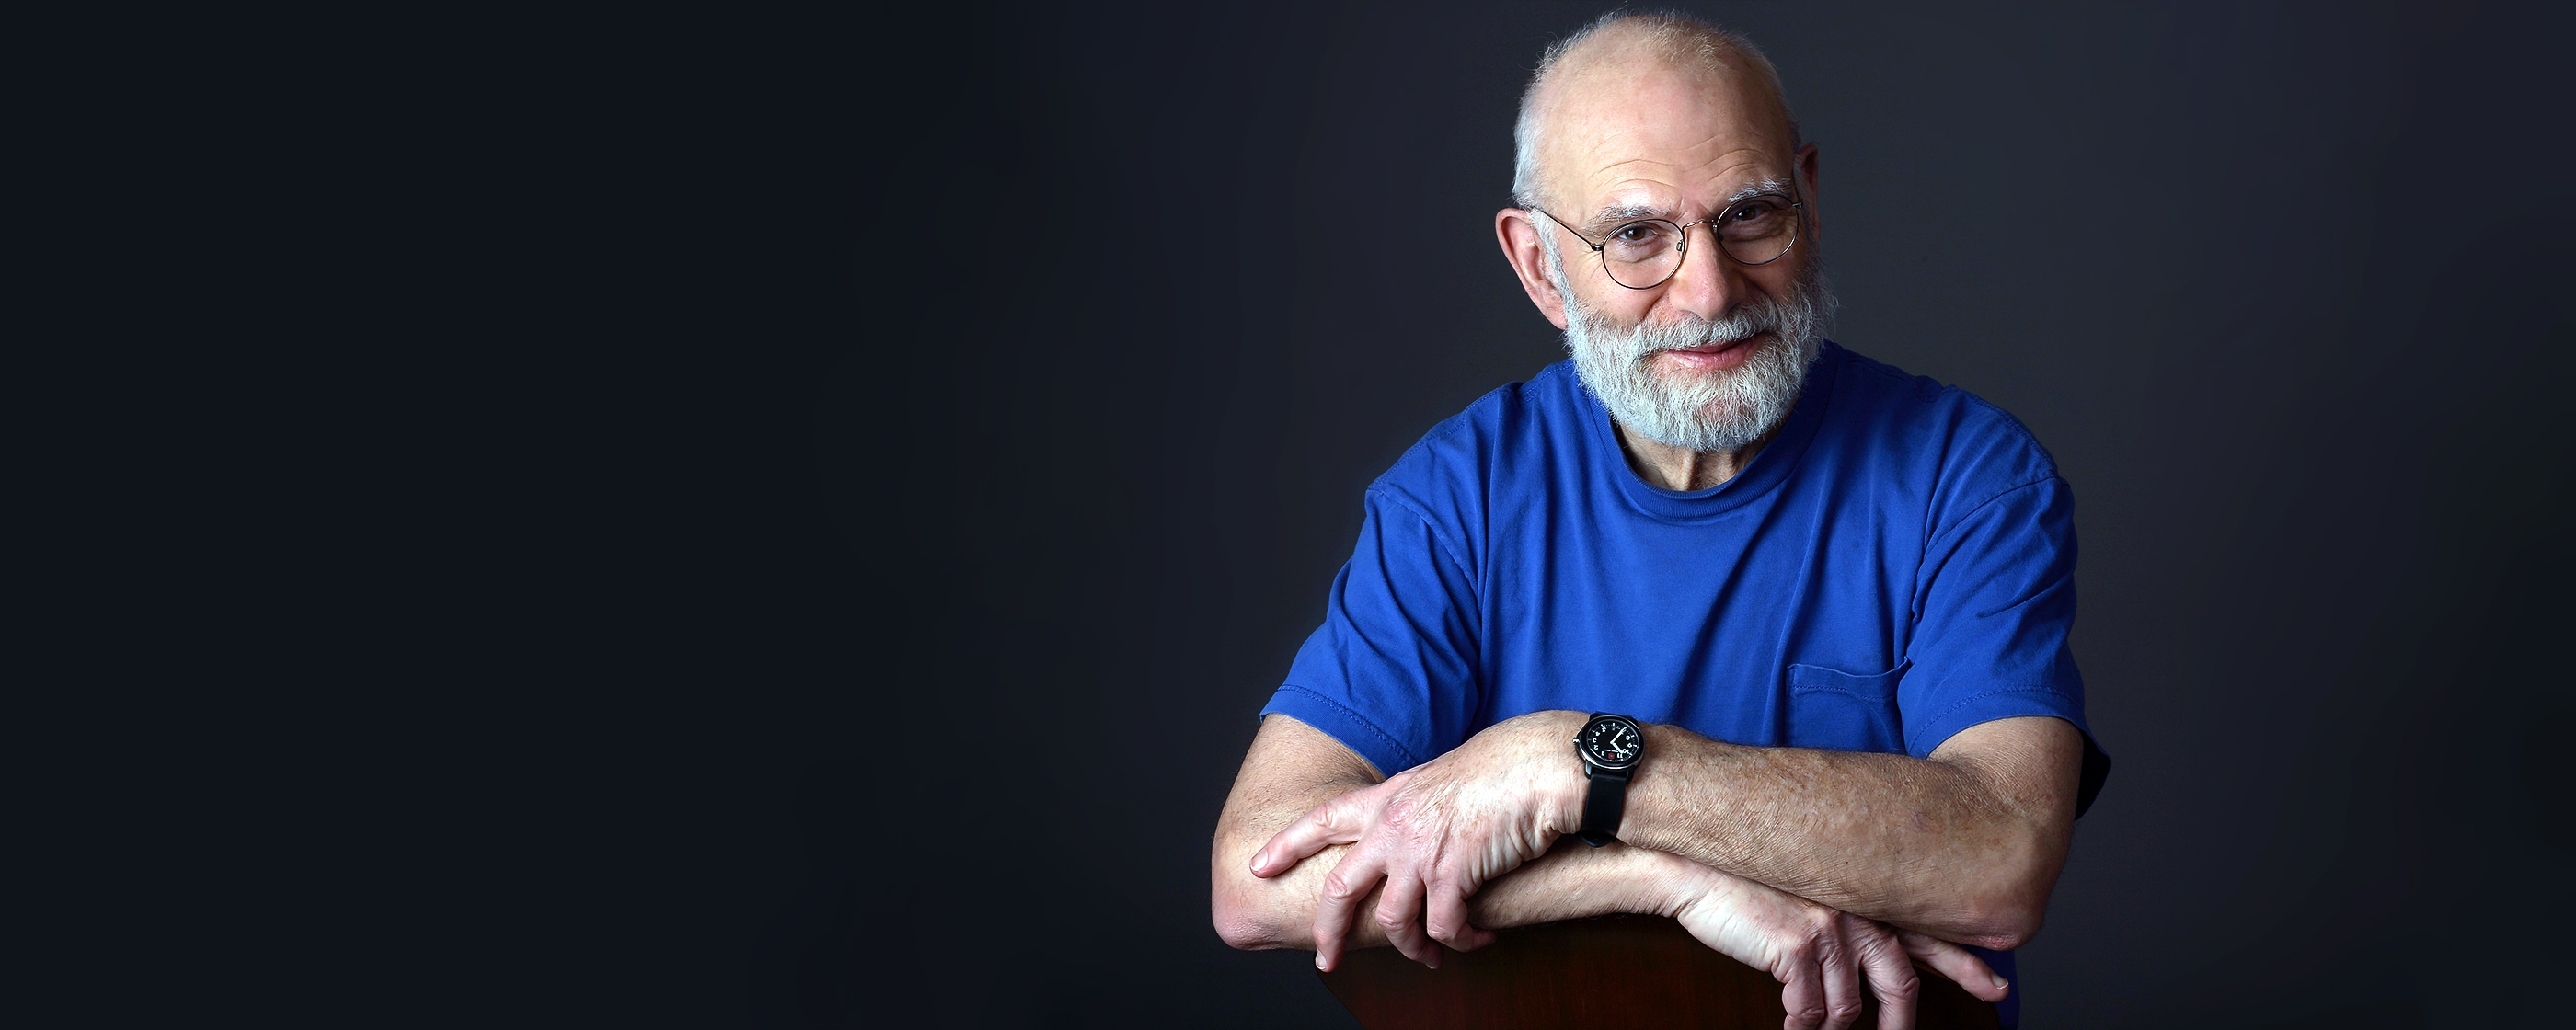 Garden Scientists Pay Tribute to Dr. Oliver Sacks - Science Talk Archive